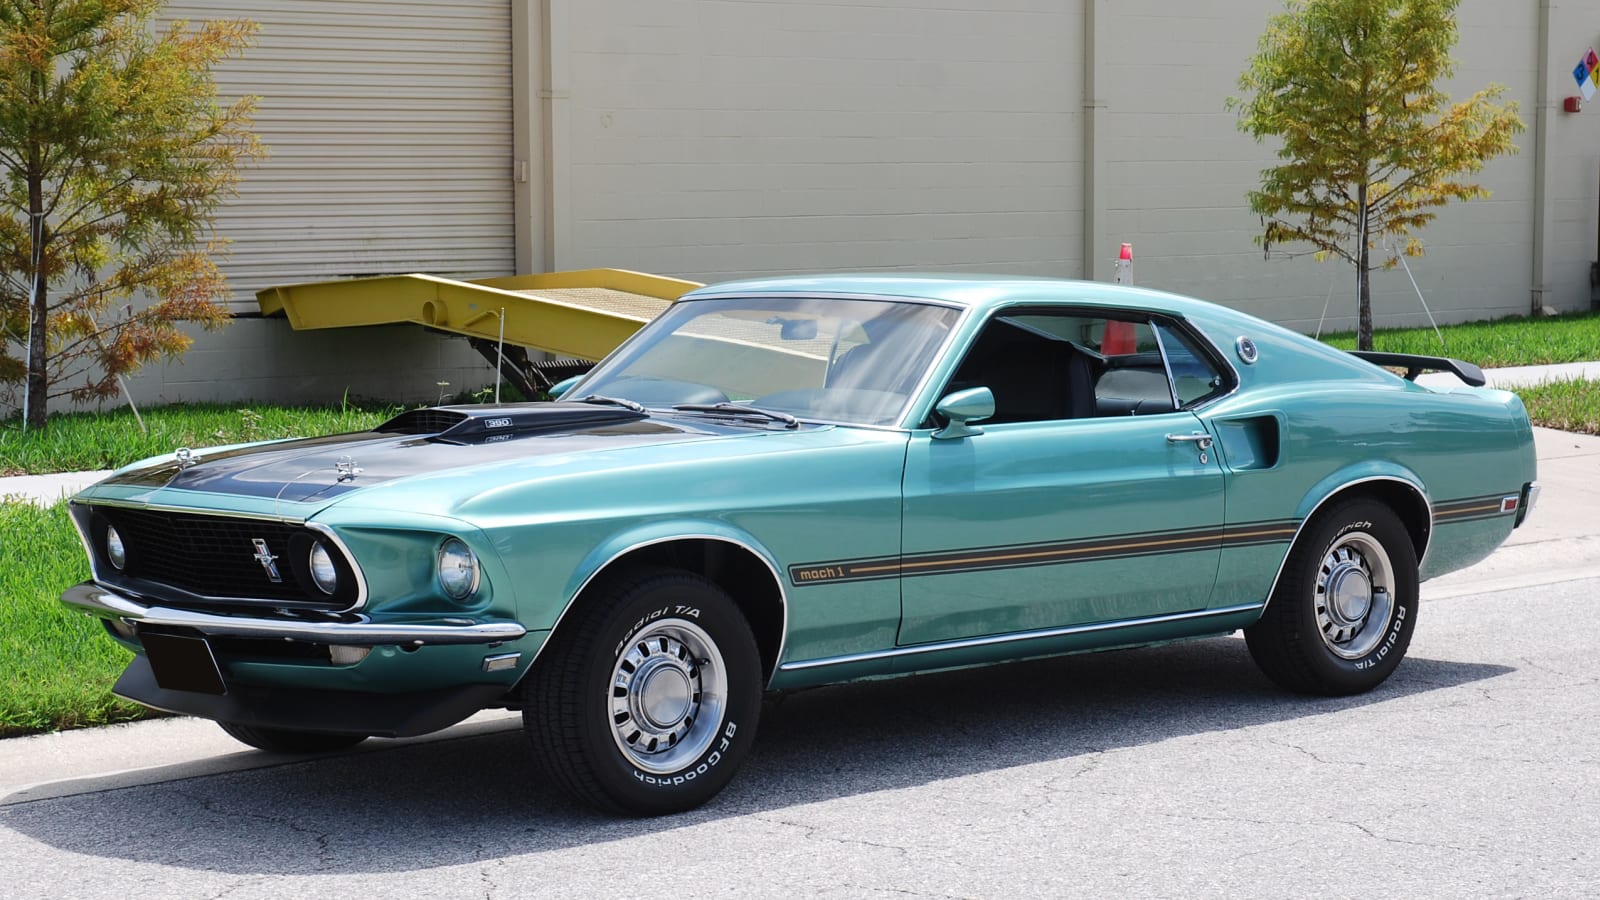 1969 Ford Mustang Mach 1 Fastback at Dallas 2015 as F139.1 - Mecum Auctions